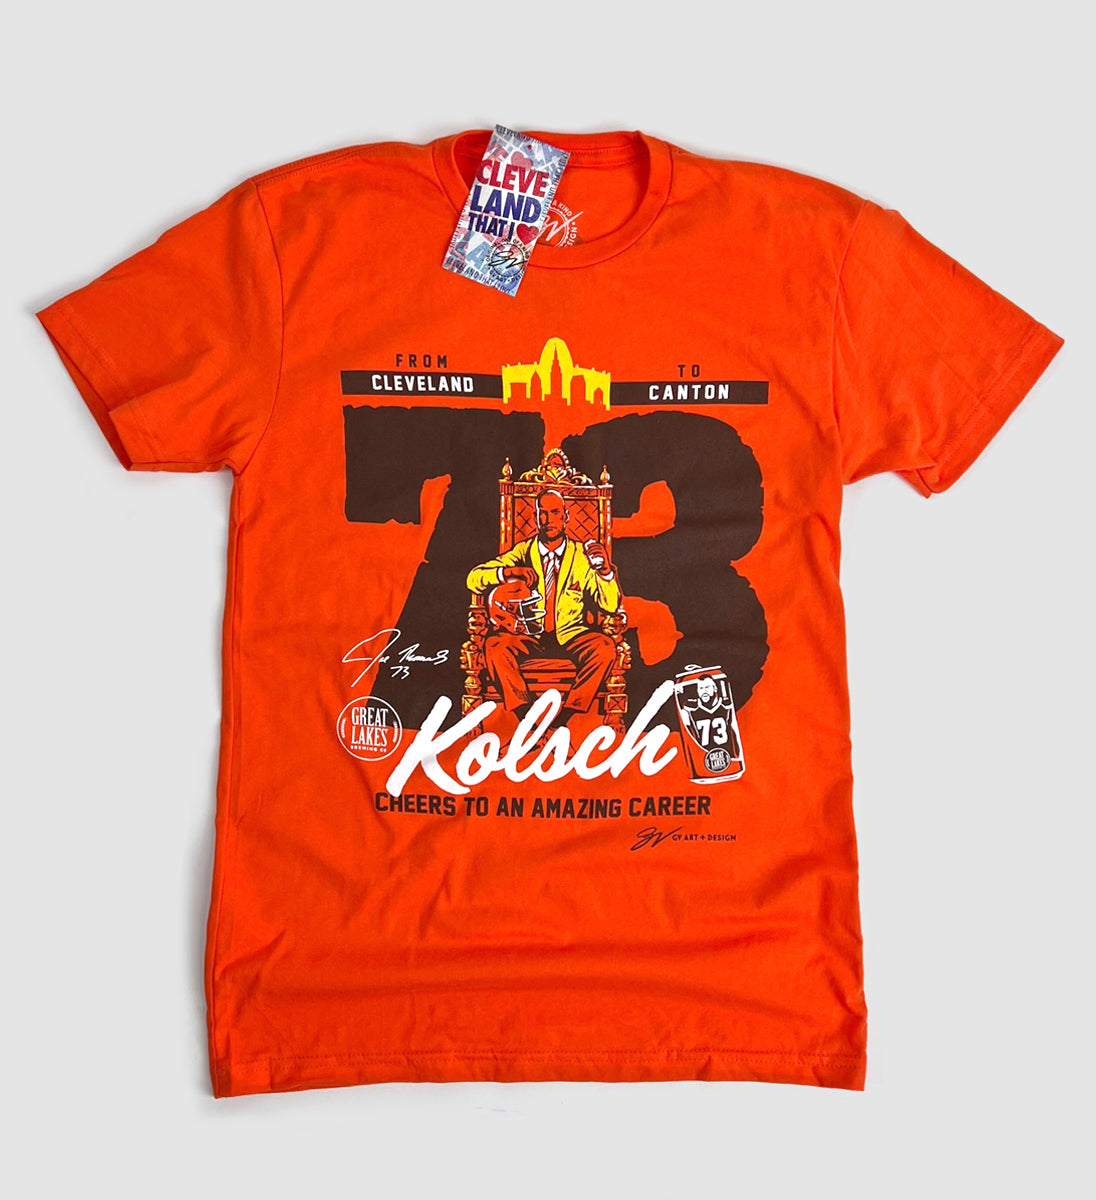 Cheers To An Amazing Career 73 Kolsch T shirt